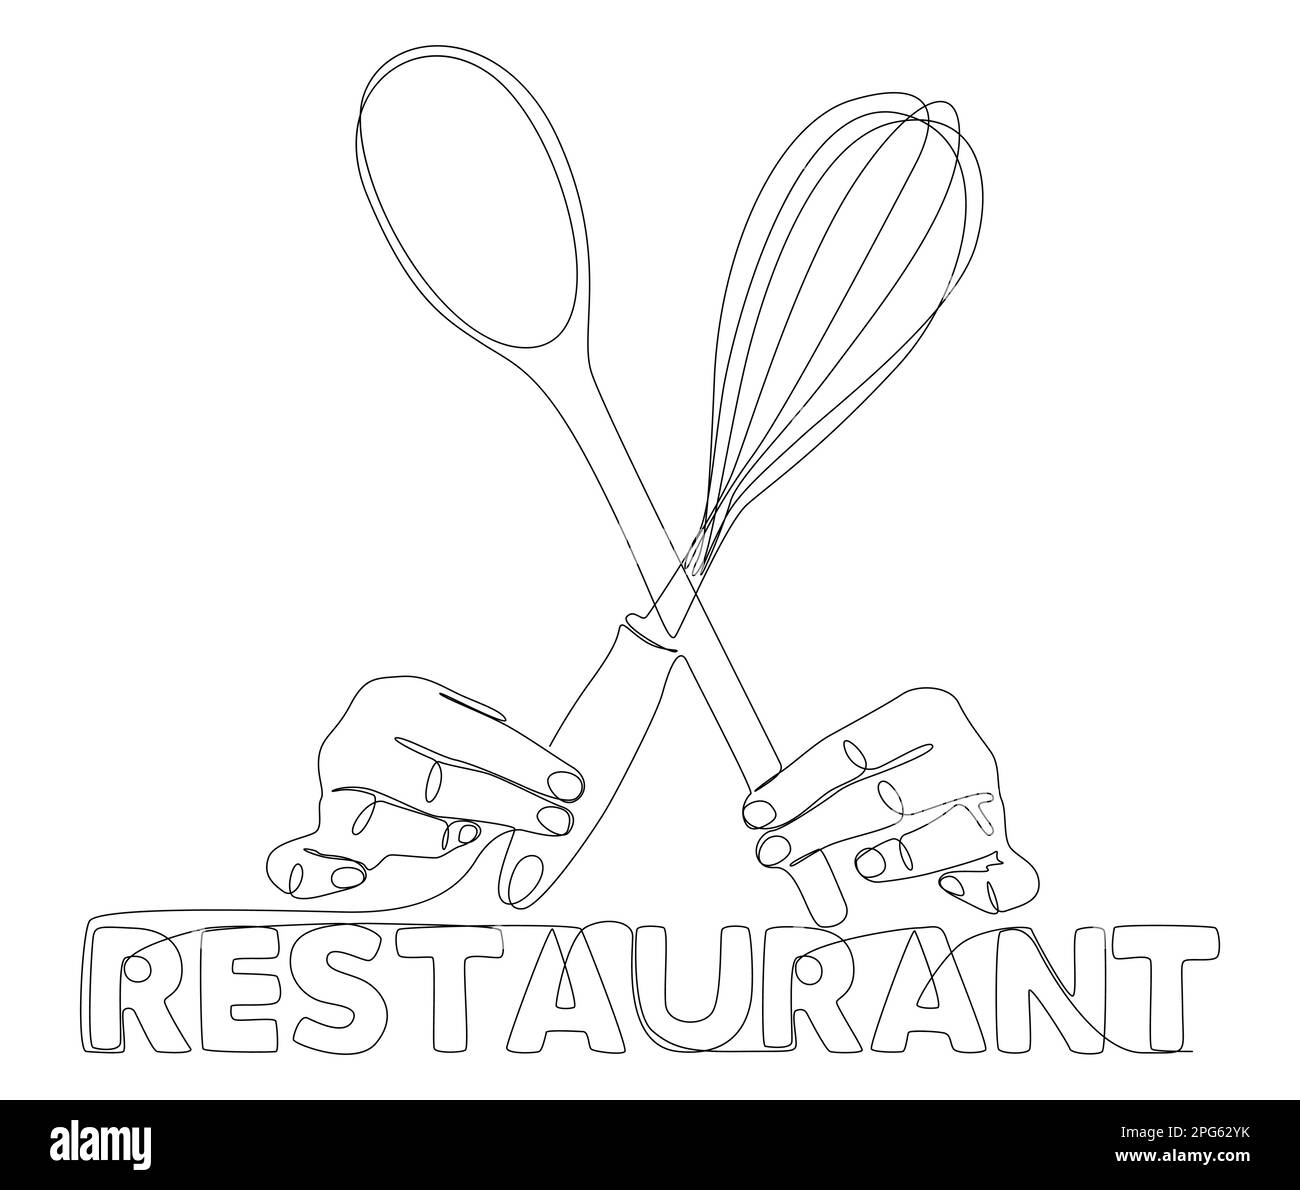 One continuous line of hand holding Kitchen Utensil with Restaurant text. Thin Line Illustration vector concept. Contour Drawing Creative ideas. Stock Vector